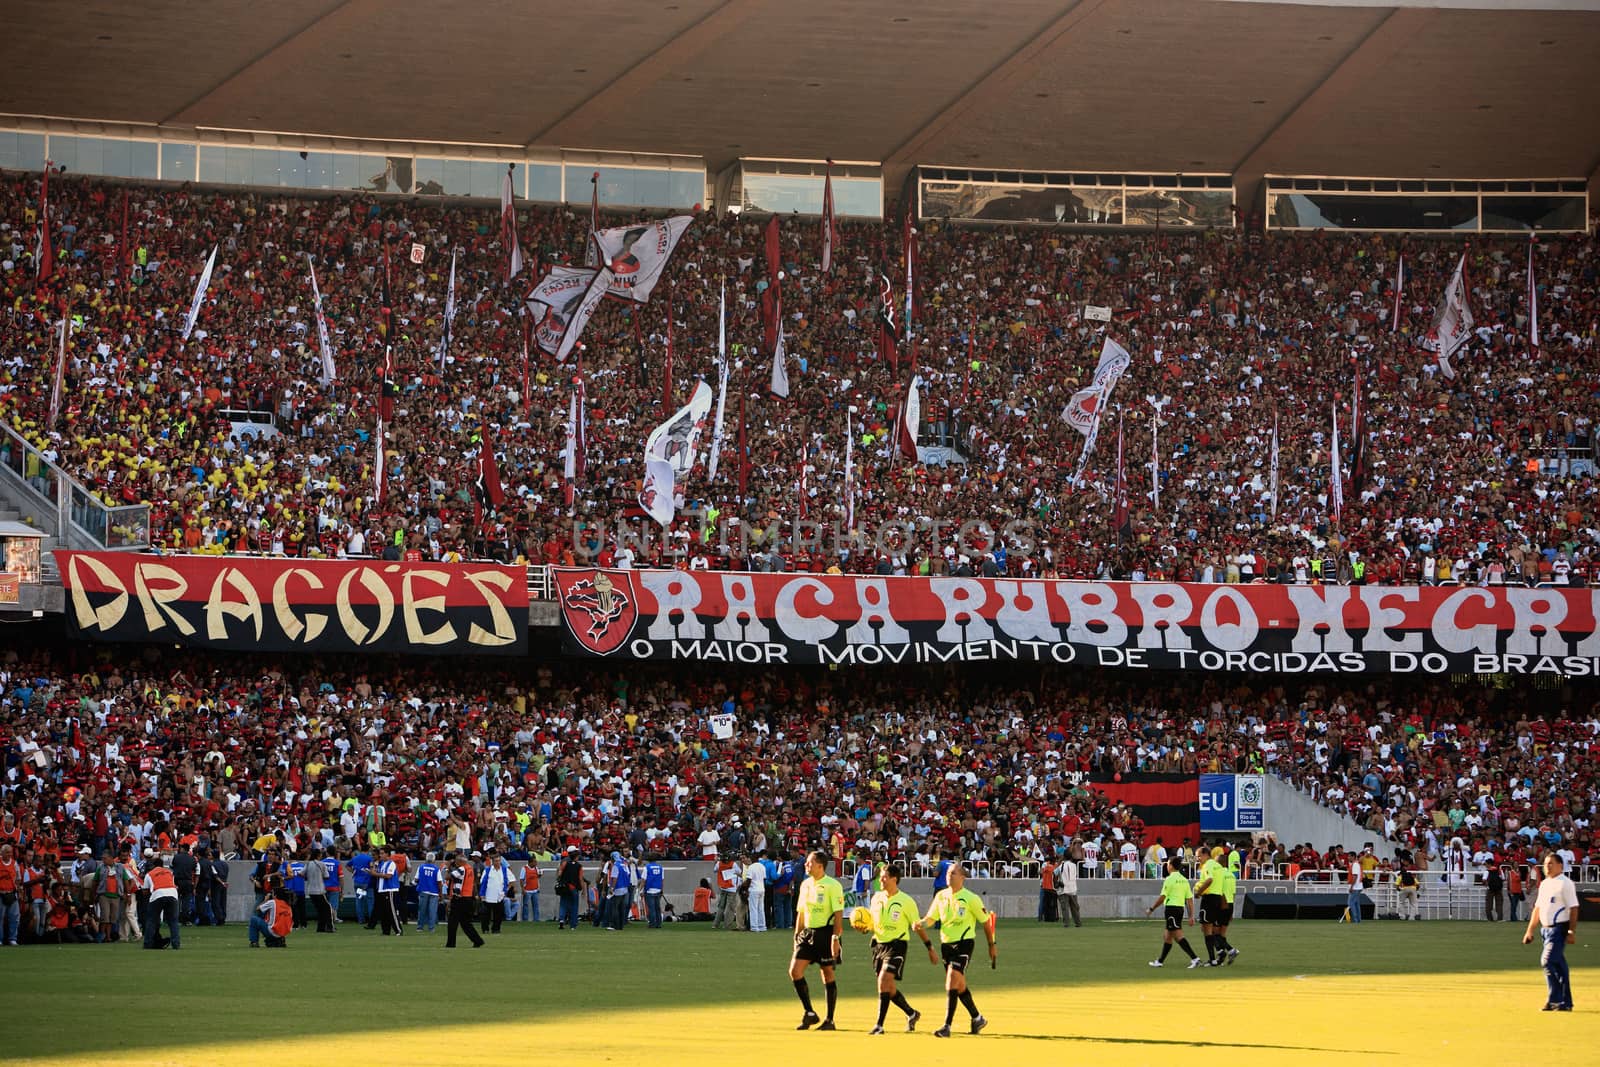 Rio de Janeiro, Brazil - September 13, 2007: Flamengo supporters at the soccer rio state championship 2007 final between Flamengo and Botafogo in the Old Maracana stadium